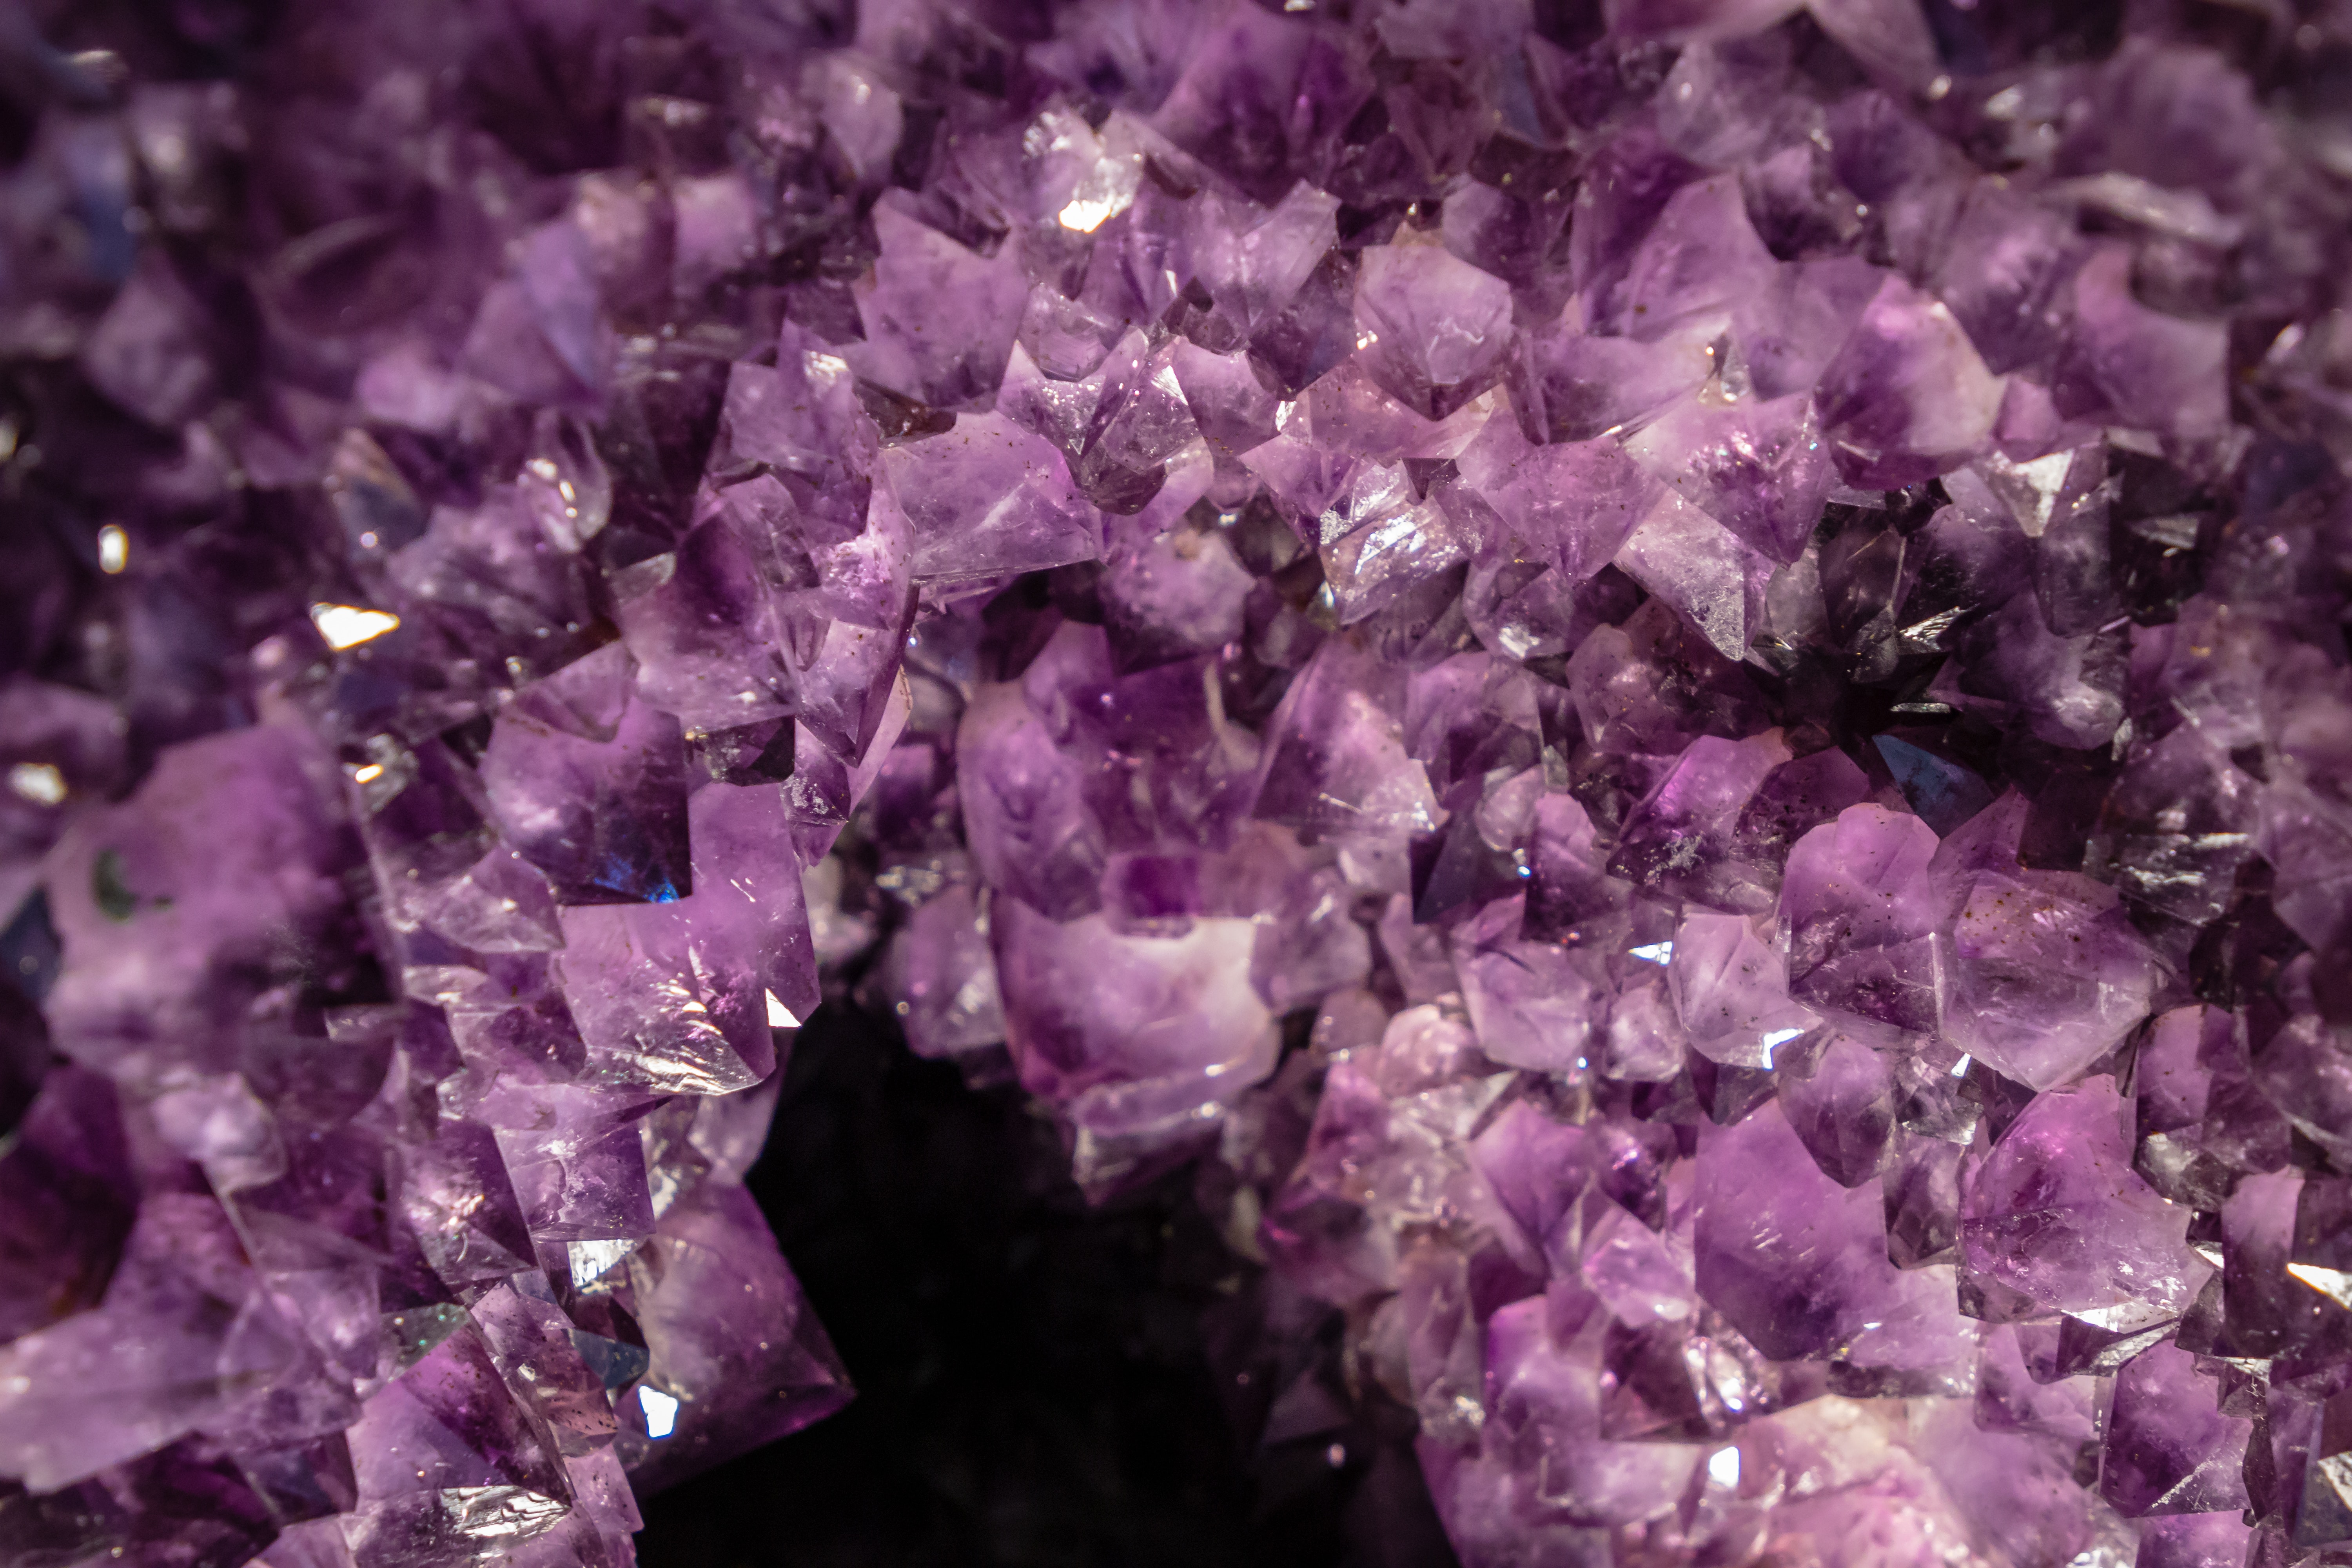 A shimmering and sharp amethyst crystal